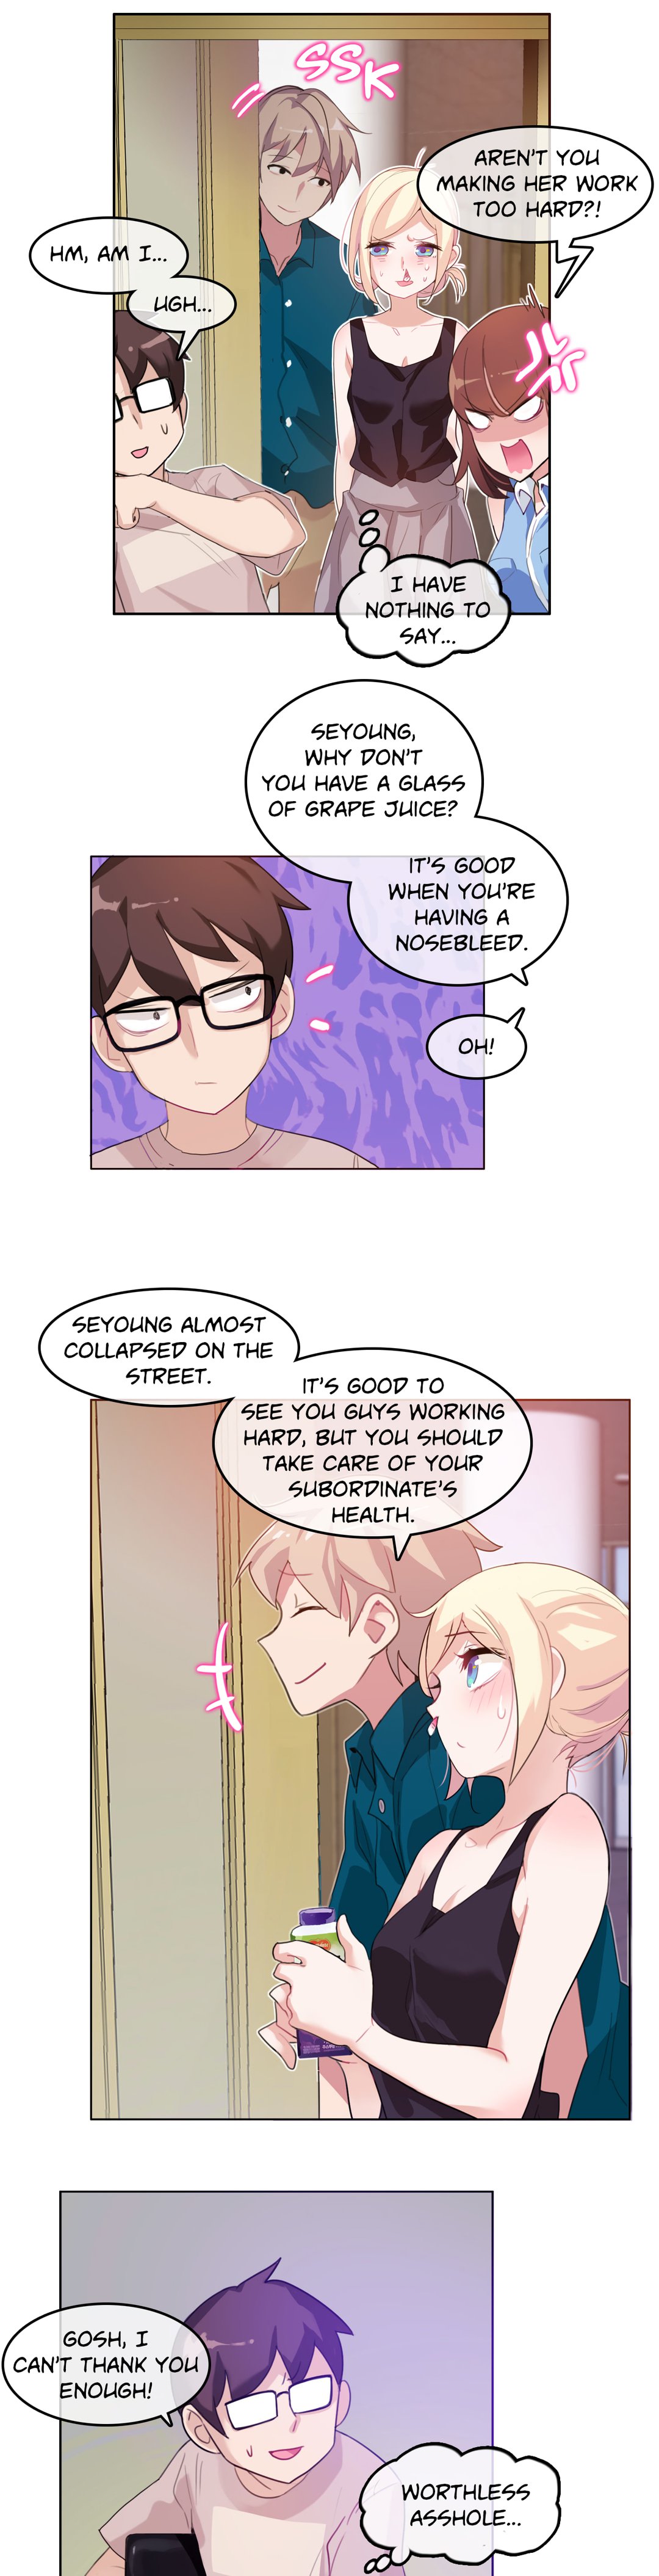 A Pervert's Daily Life - 6 page 2